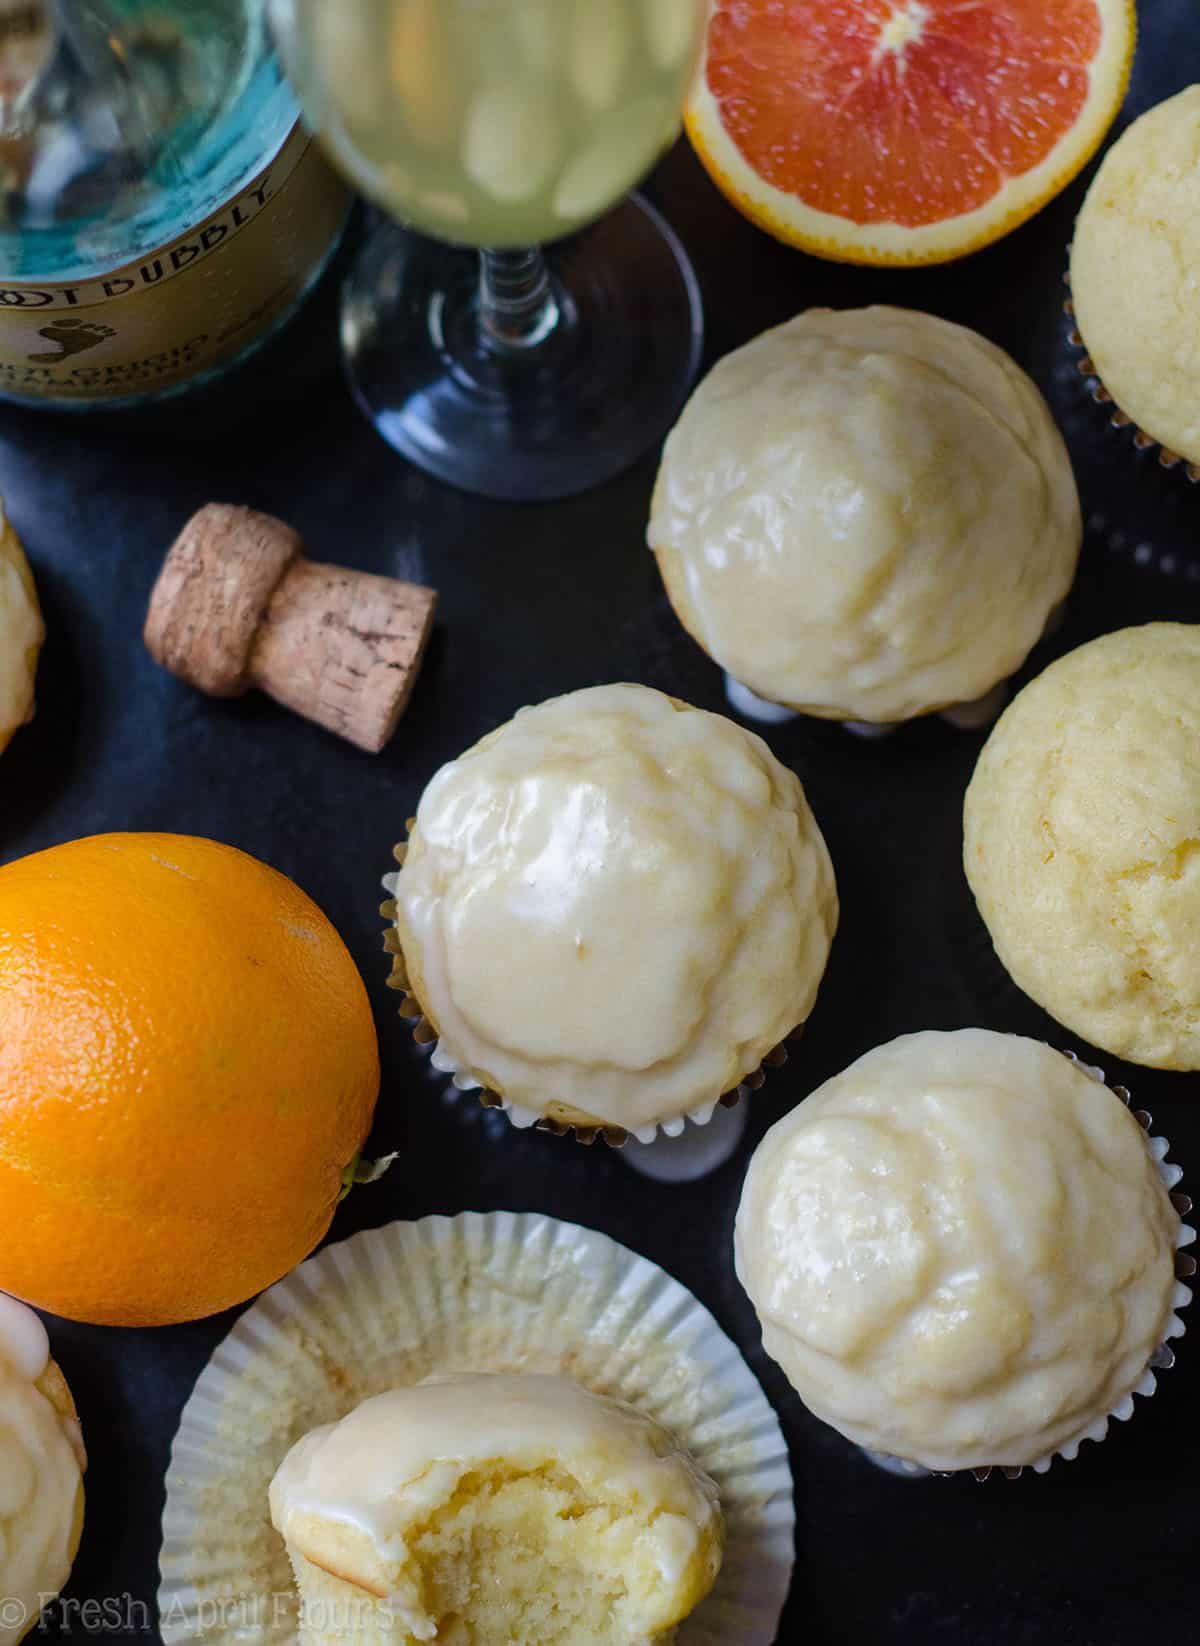 Tender citrus muffins made with a champagne reduction and topped with a boozy orange glaze are the sweetest way to get your mimosa fix. via @frshaprilflours